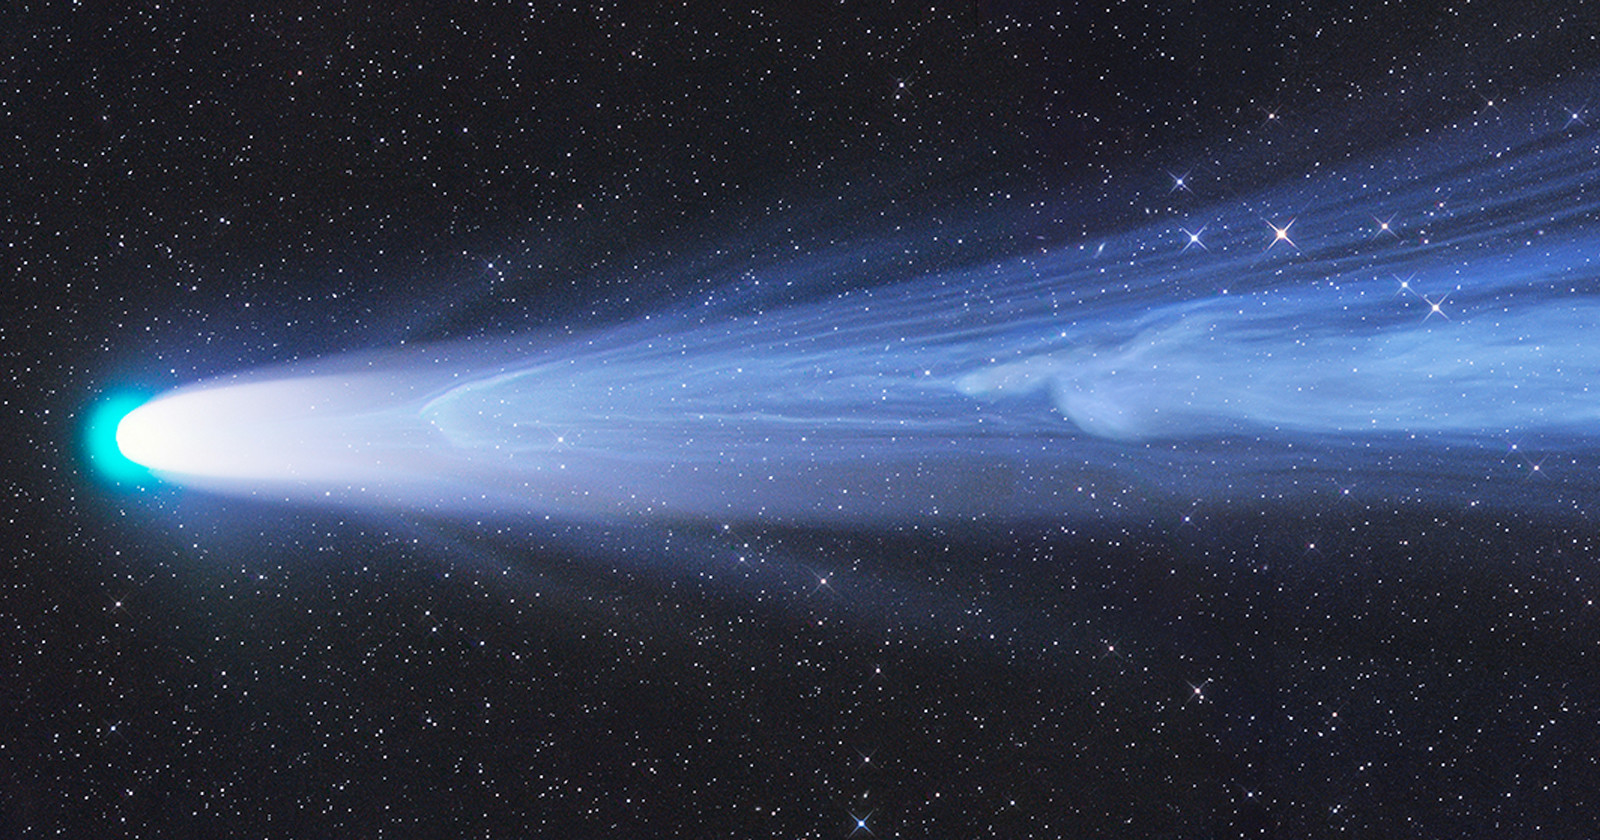 A Last Photo of Comet Leonard Wins Astronomy Photographer of the Year